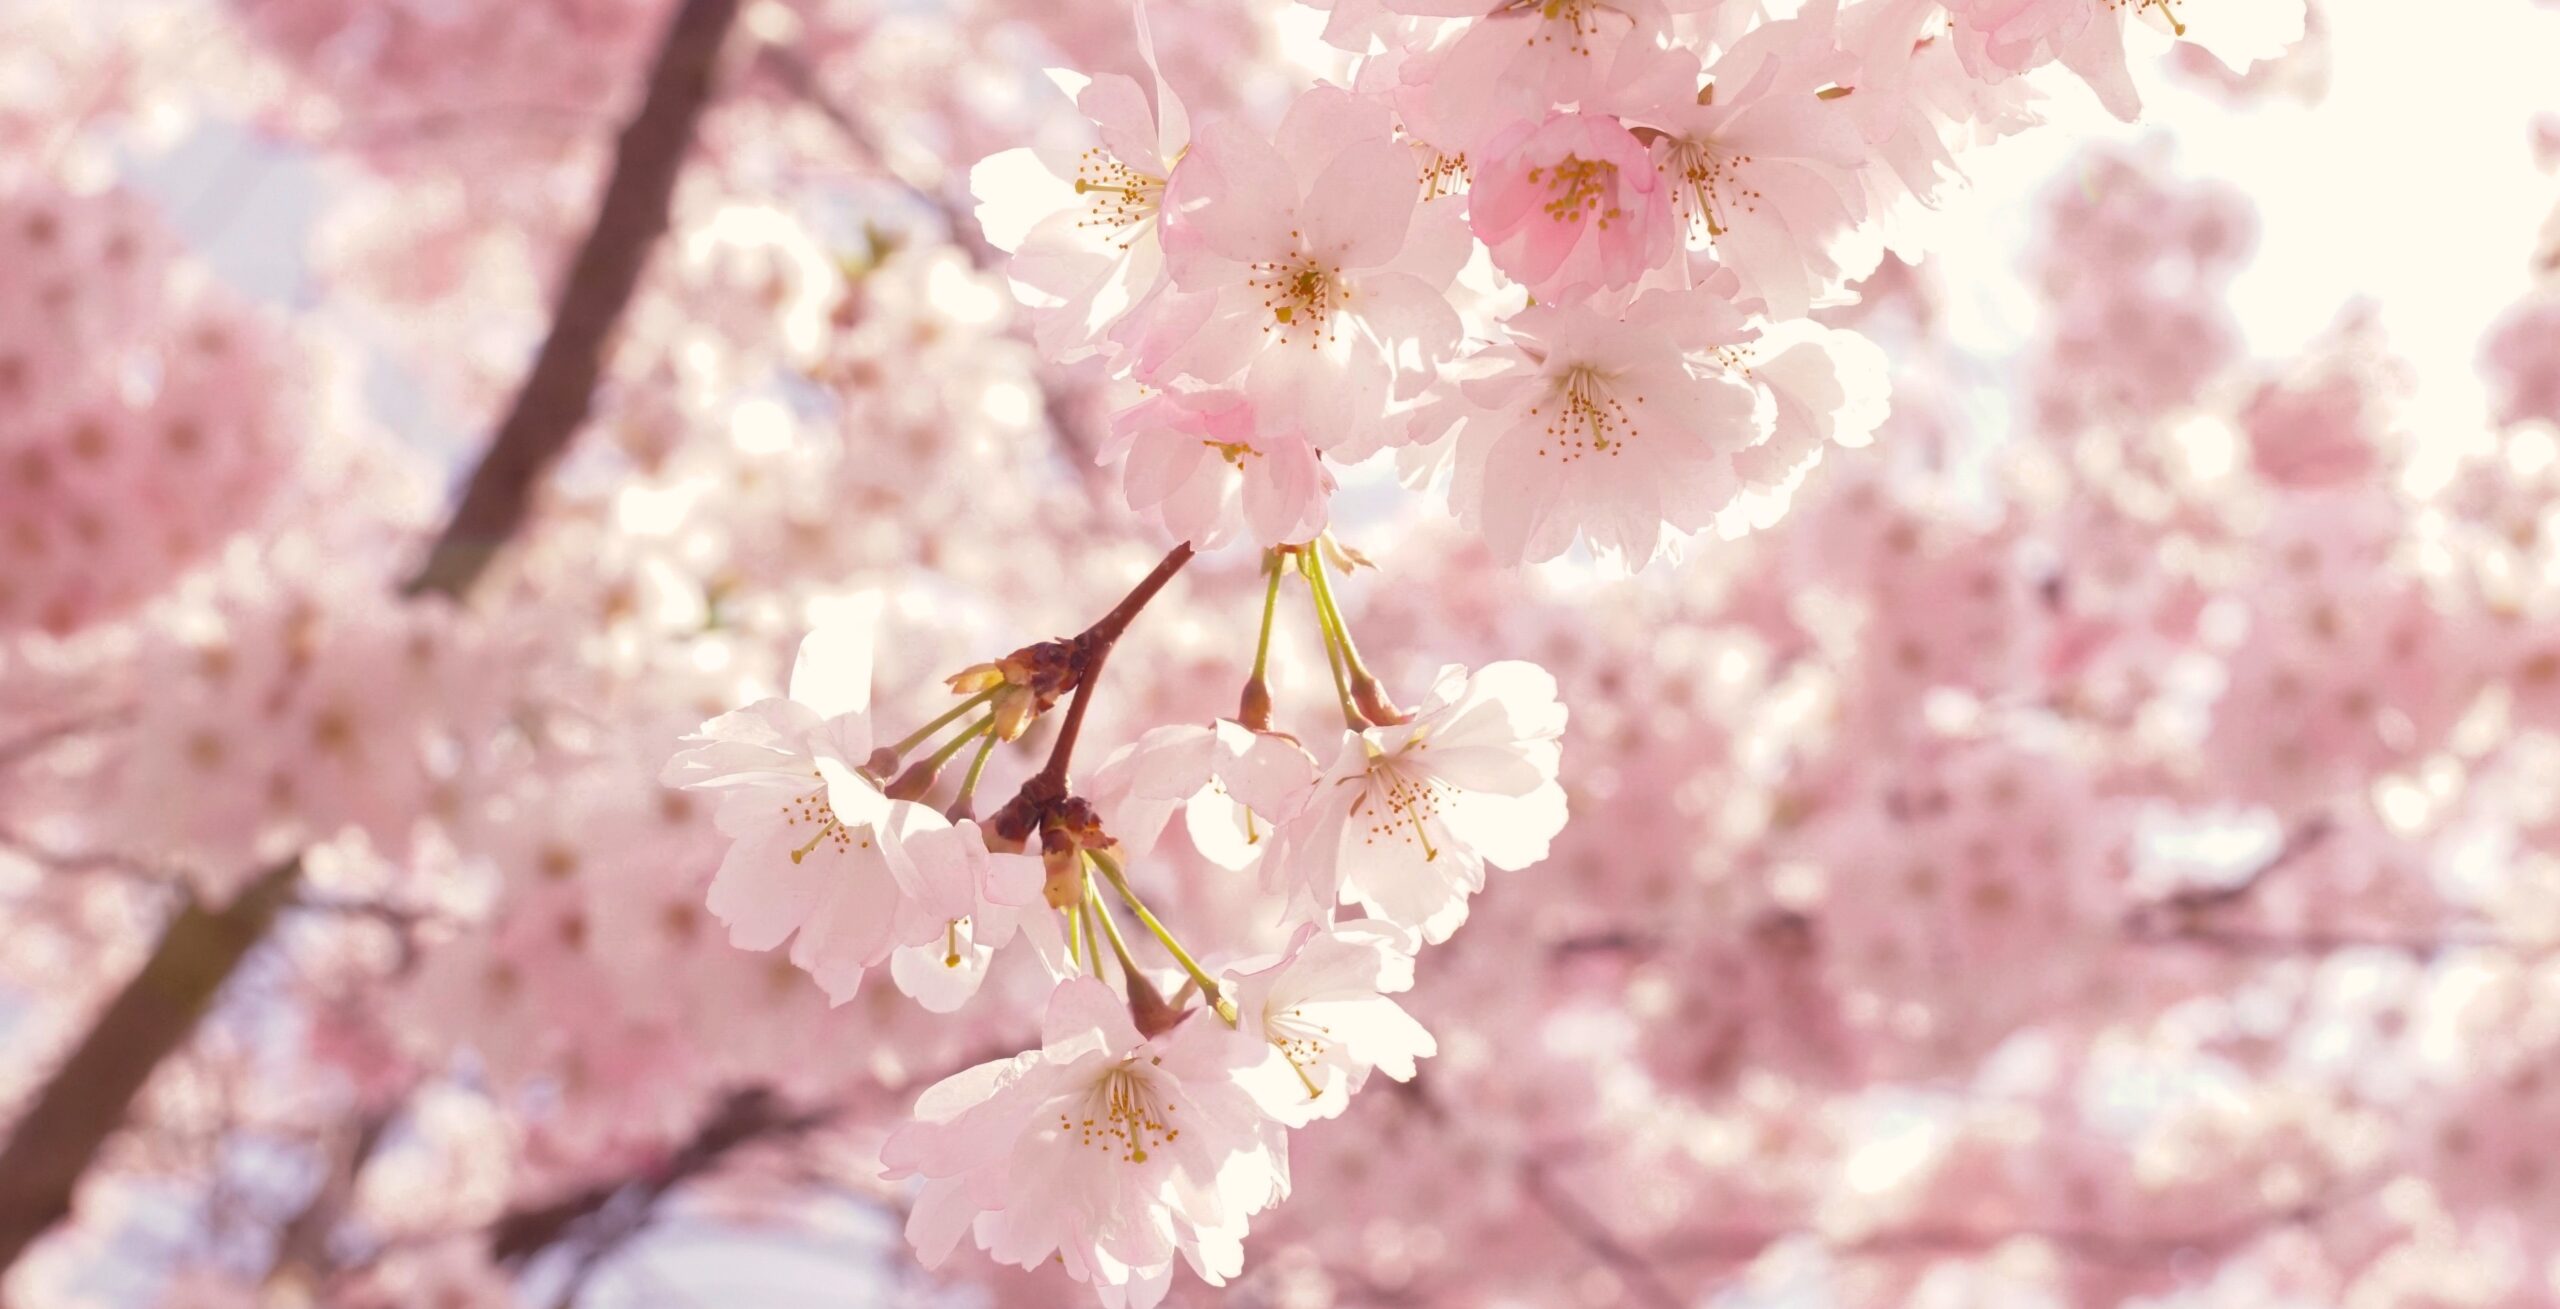 Branches of a fully bloomed cherry tree showcase their warm fluffy pink flowers on a bright sunny day.